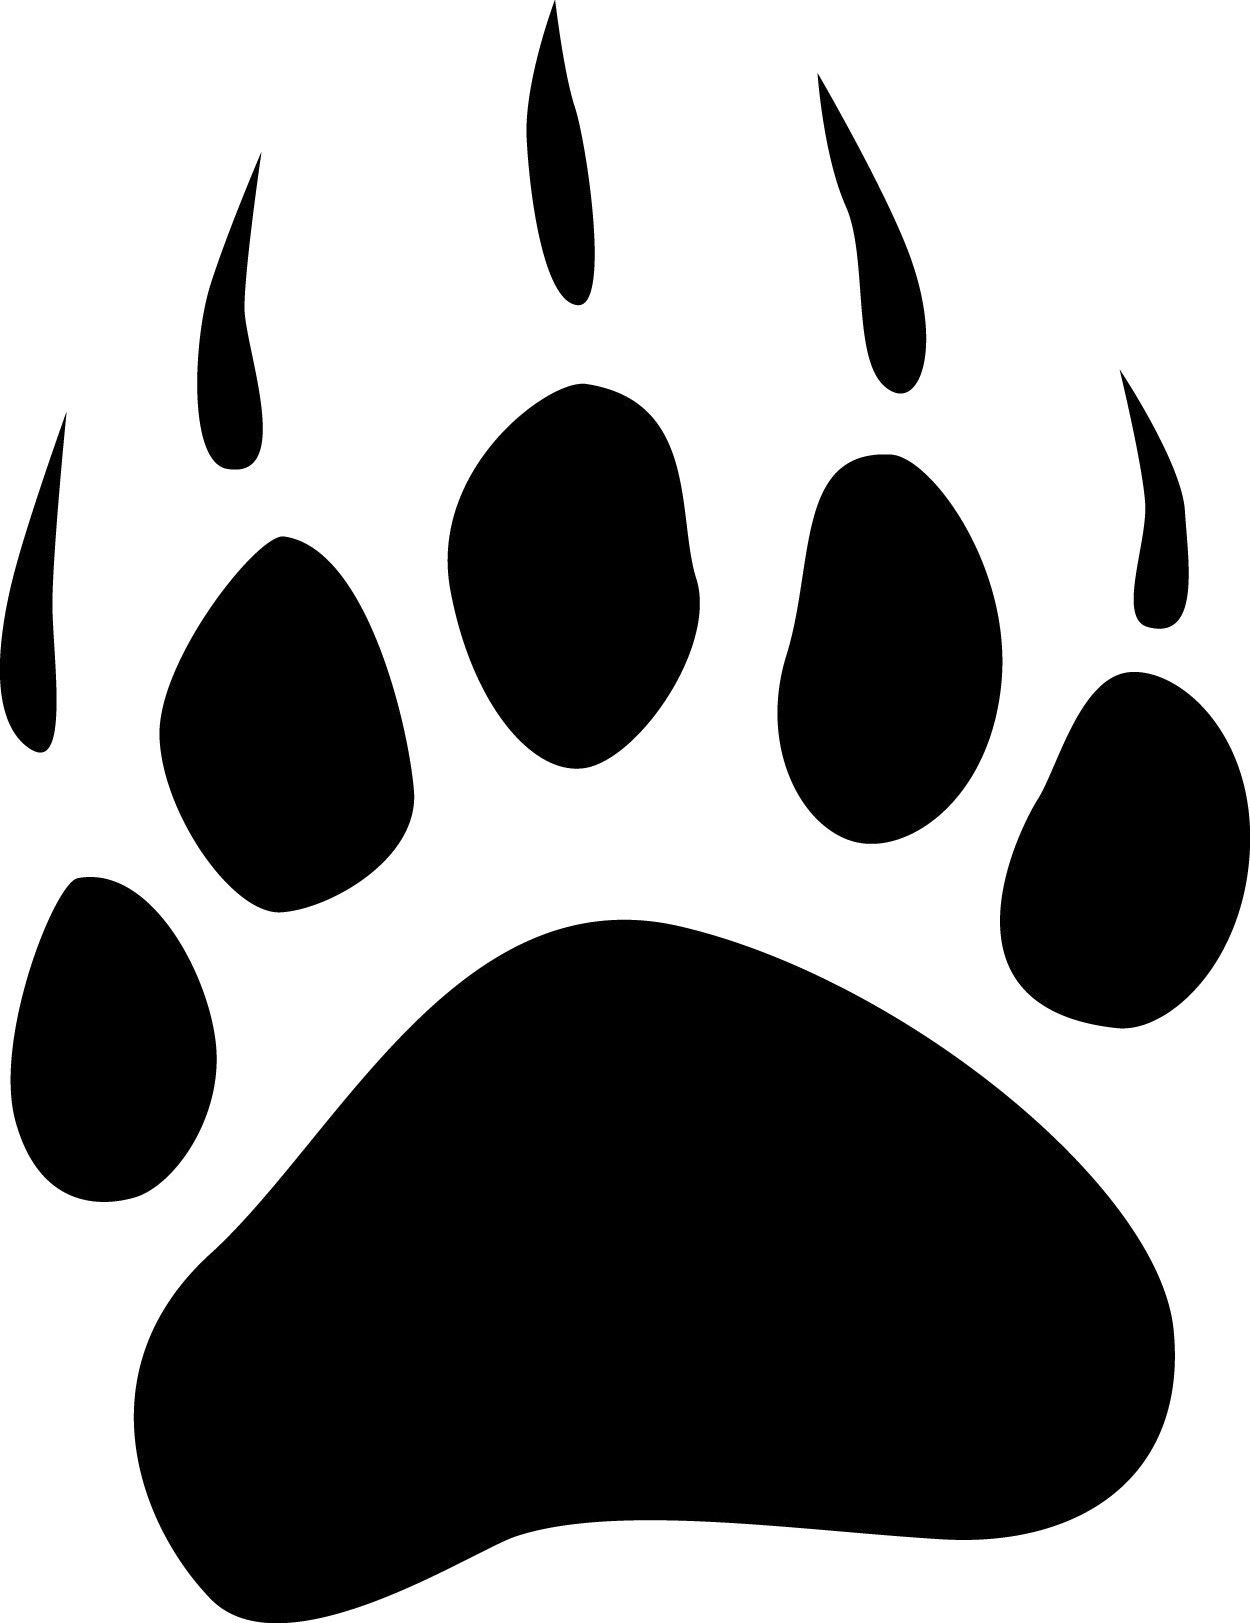 Best Photos of Printable Bear Paw Prints - Grizzly Bear Paw Print ...